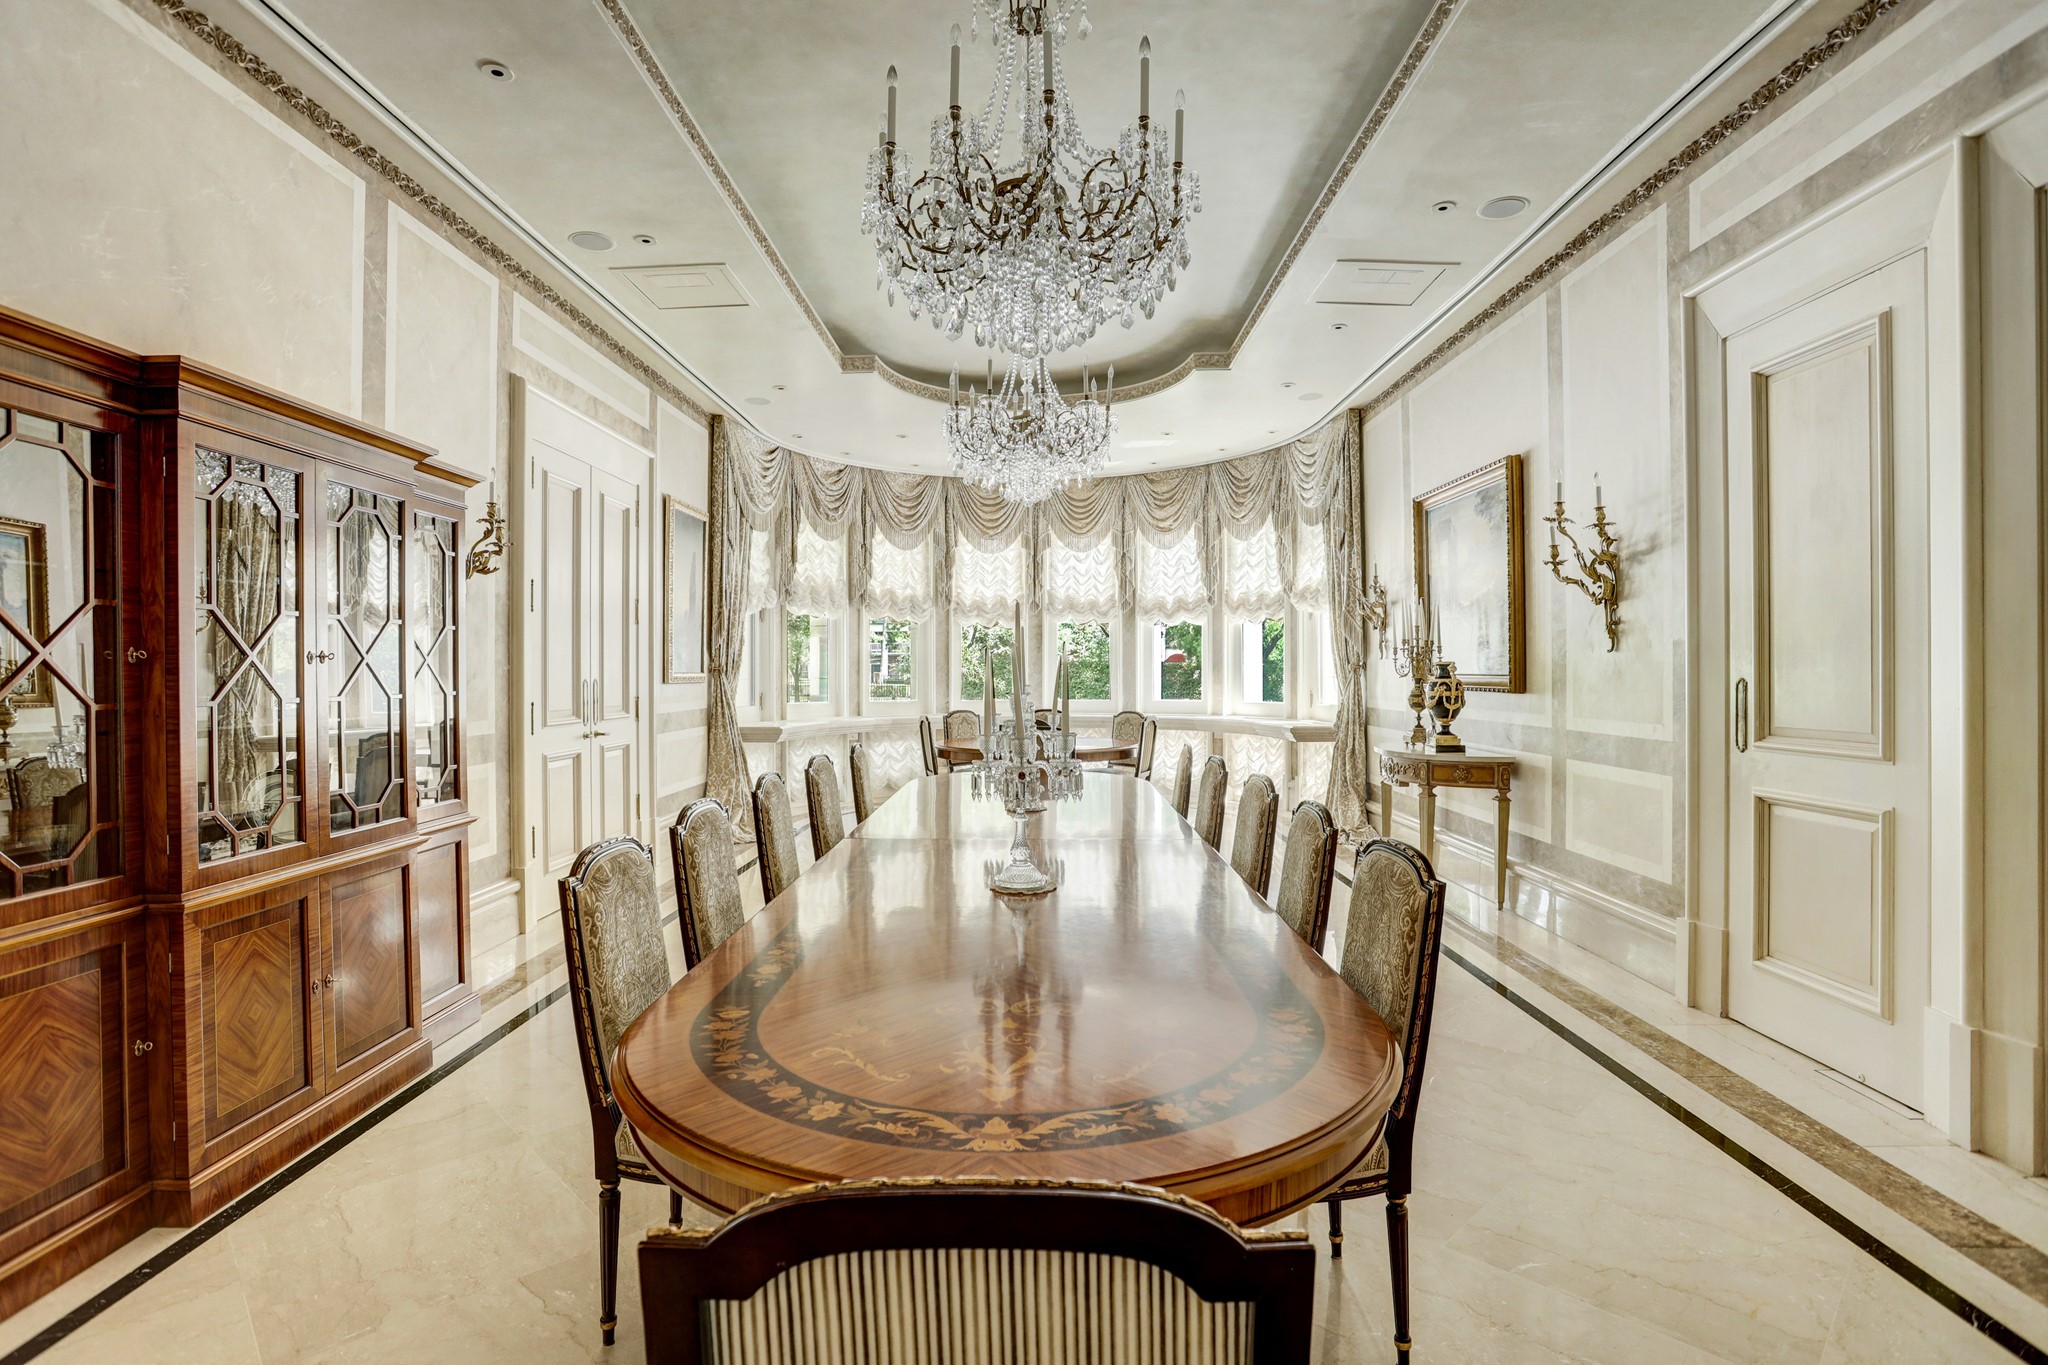 The grandiose formal dining room seats 44 and features an expertly-crafted wall finish which perfectly matches the sleek, inlaid marble tile floor.  An ornamental plastered ceiling boasts recessed cove lighting while natural light floods the space through the extensive bow window which features custom, multi-layered balloon valances. To the left of the frame, notice the swinging double doors which offer easy access to the Butler’s pantry and climate-controlled wine vault. 
